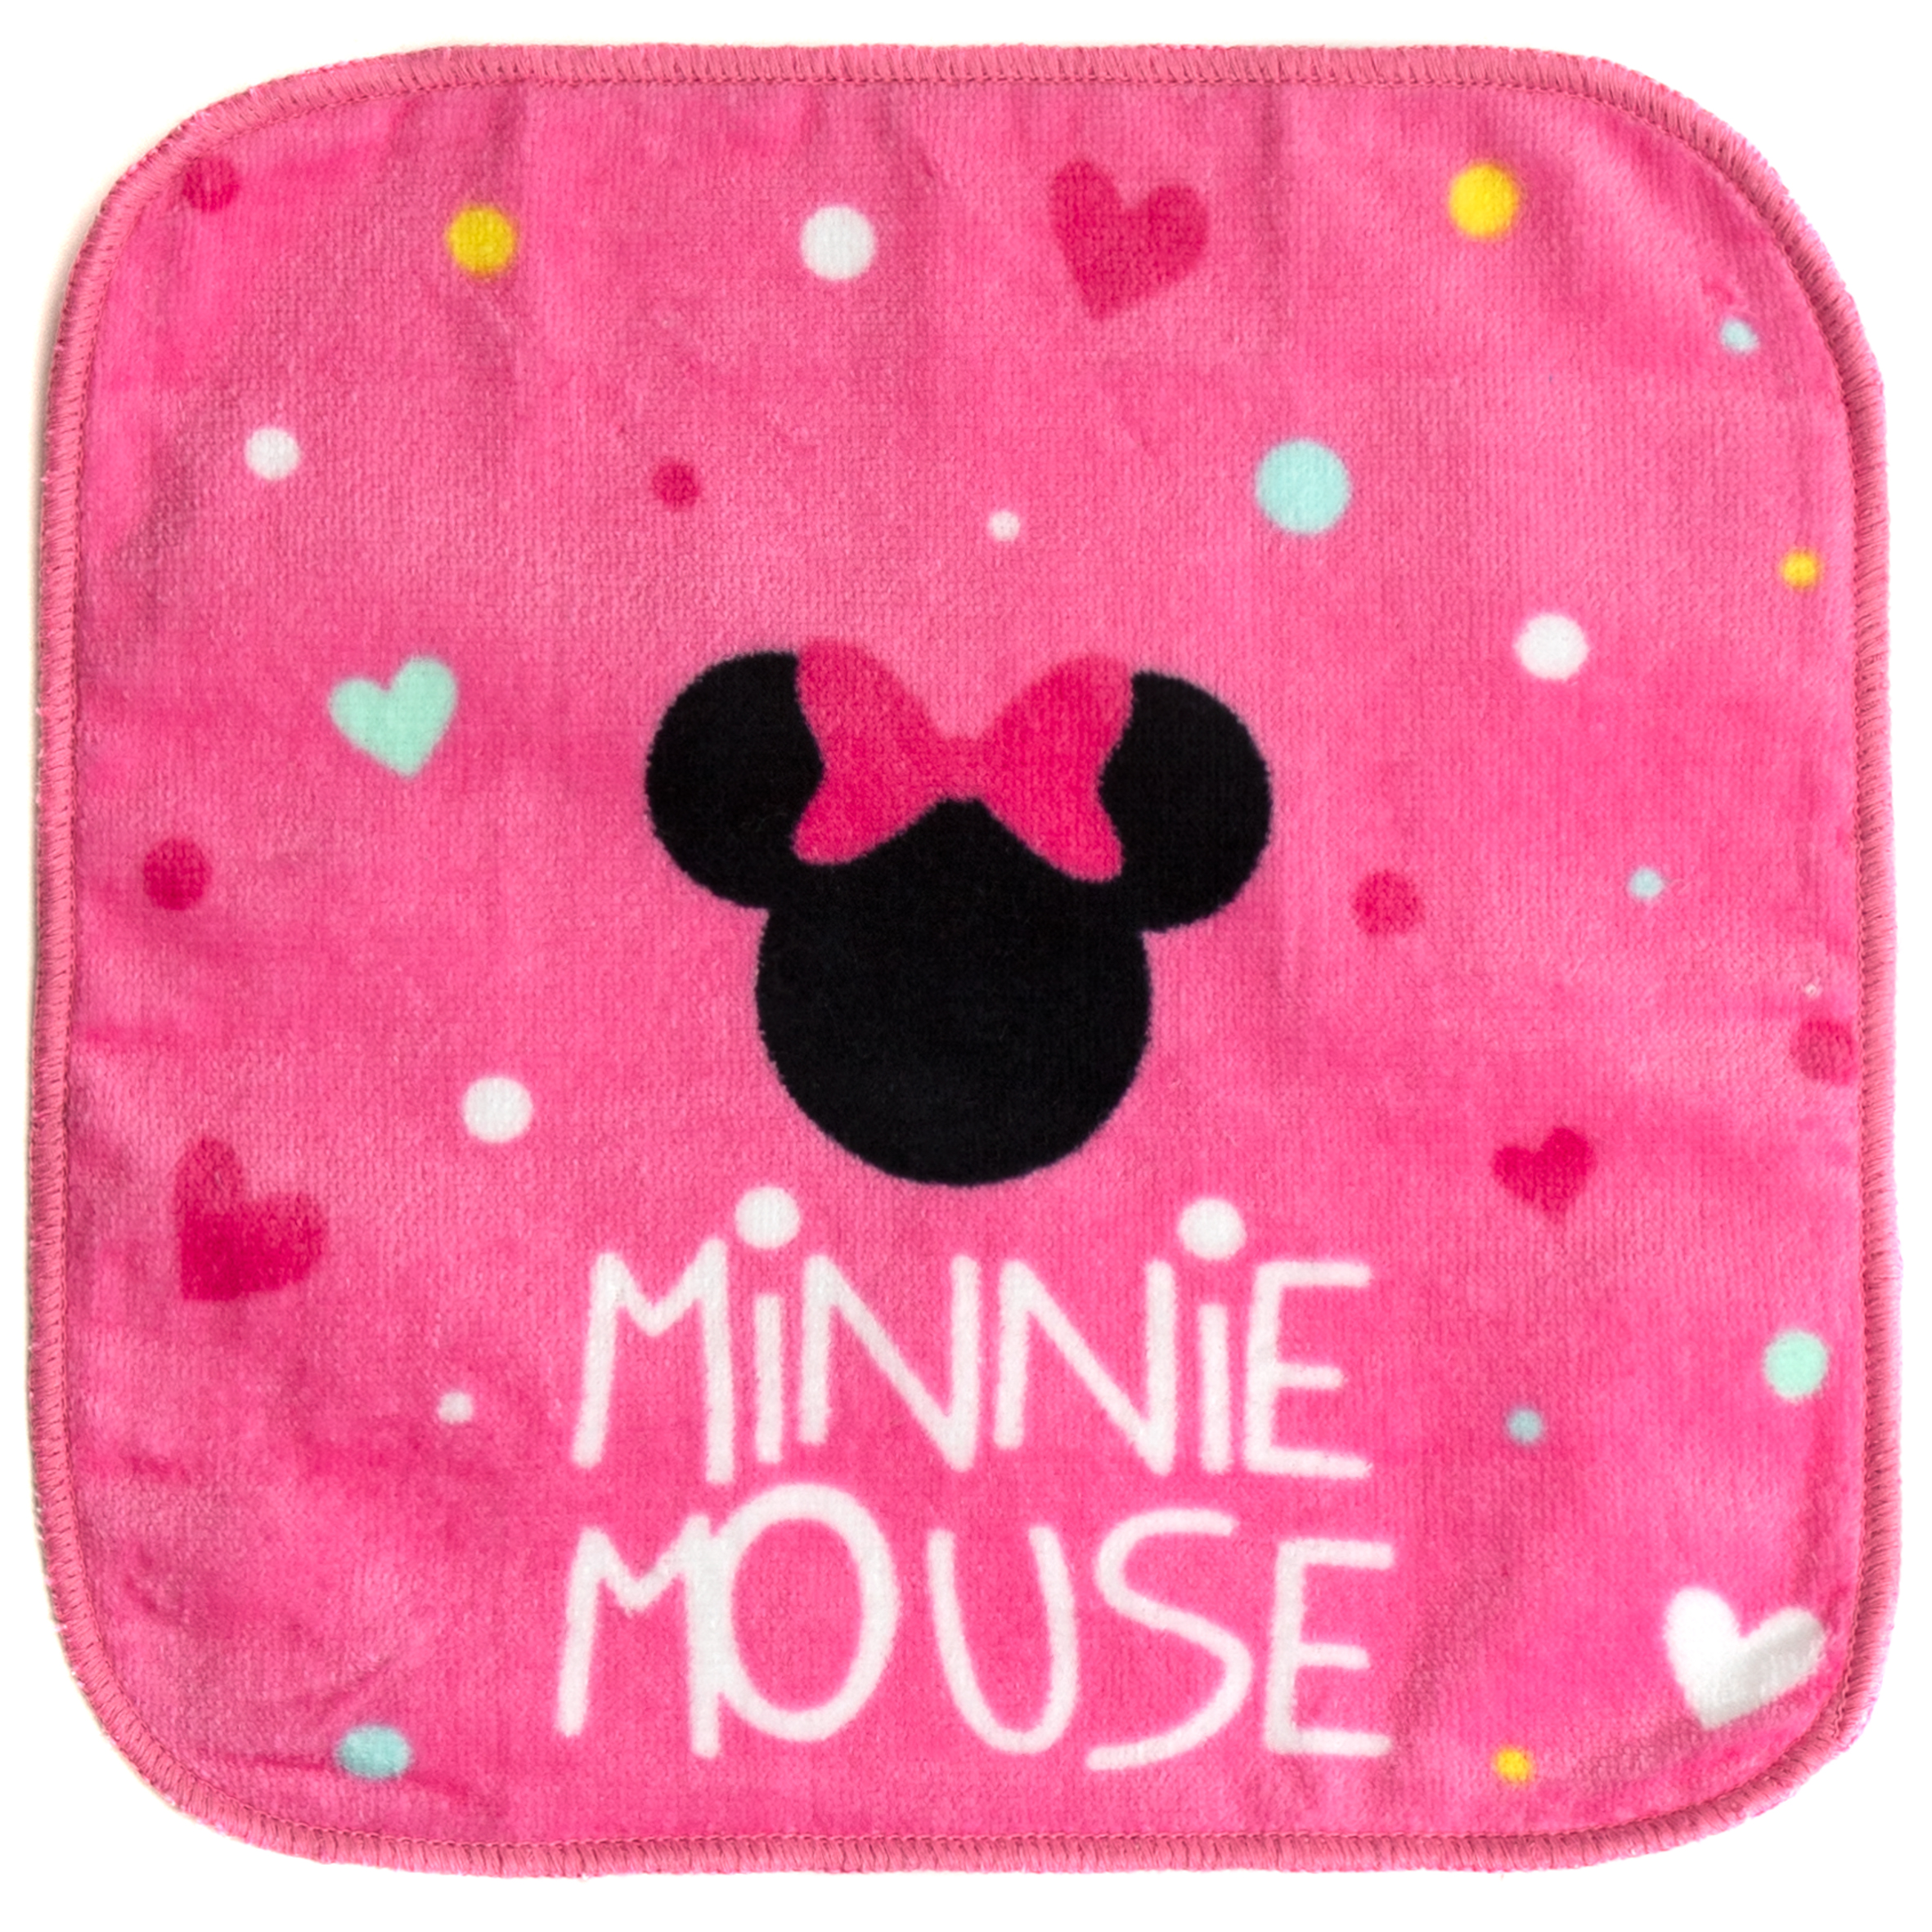 Minnie Mouse Kids Cotton 2 Piece Towel and Washcloth Set - image 5 of 8